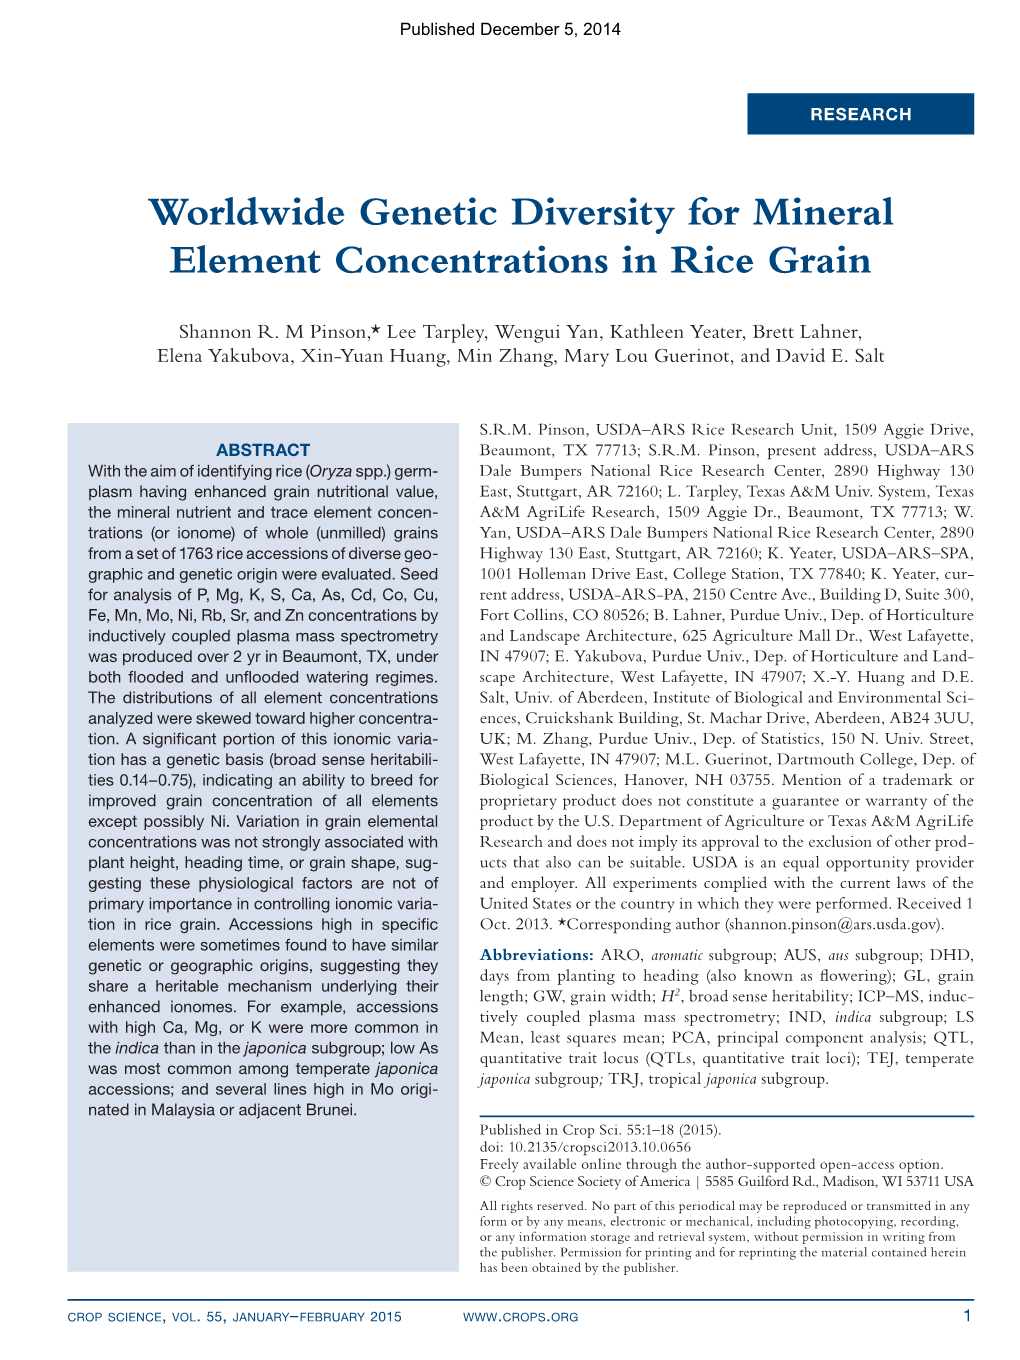 Worldwide Genetic Diversity for Mineral Element Concentrations in Rice Grain